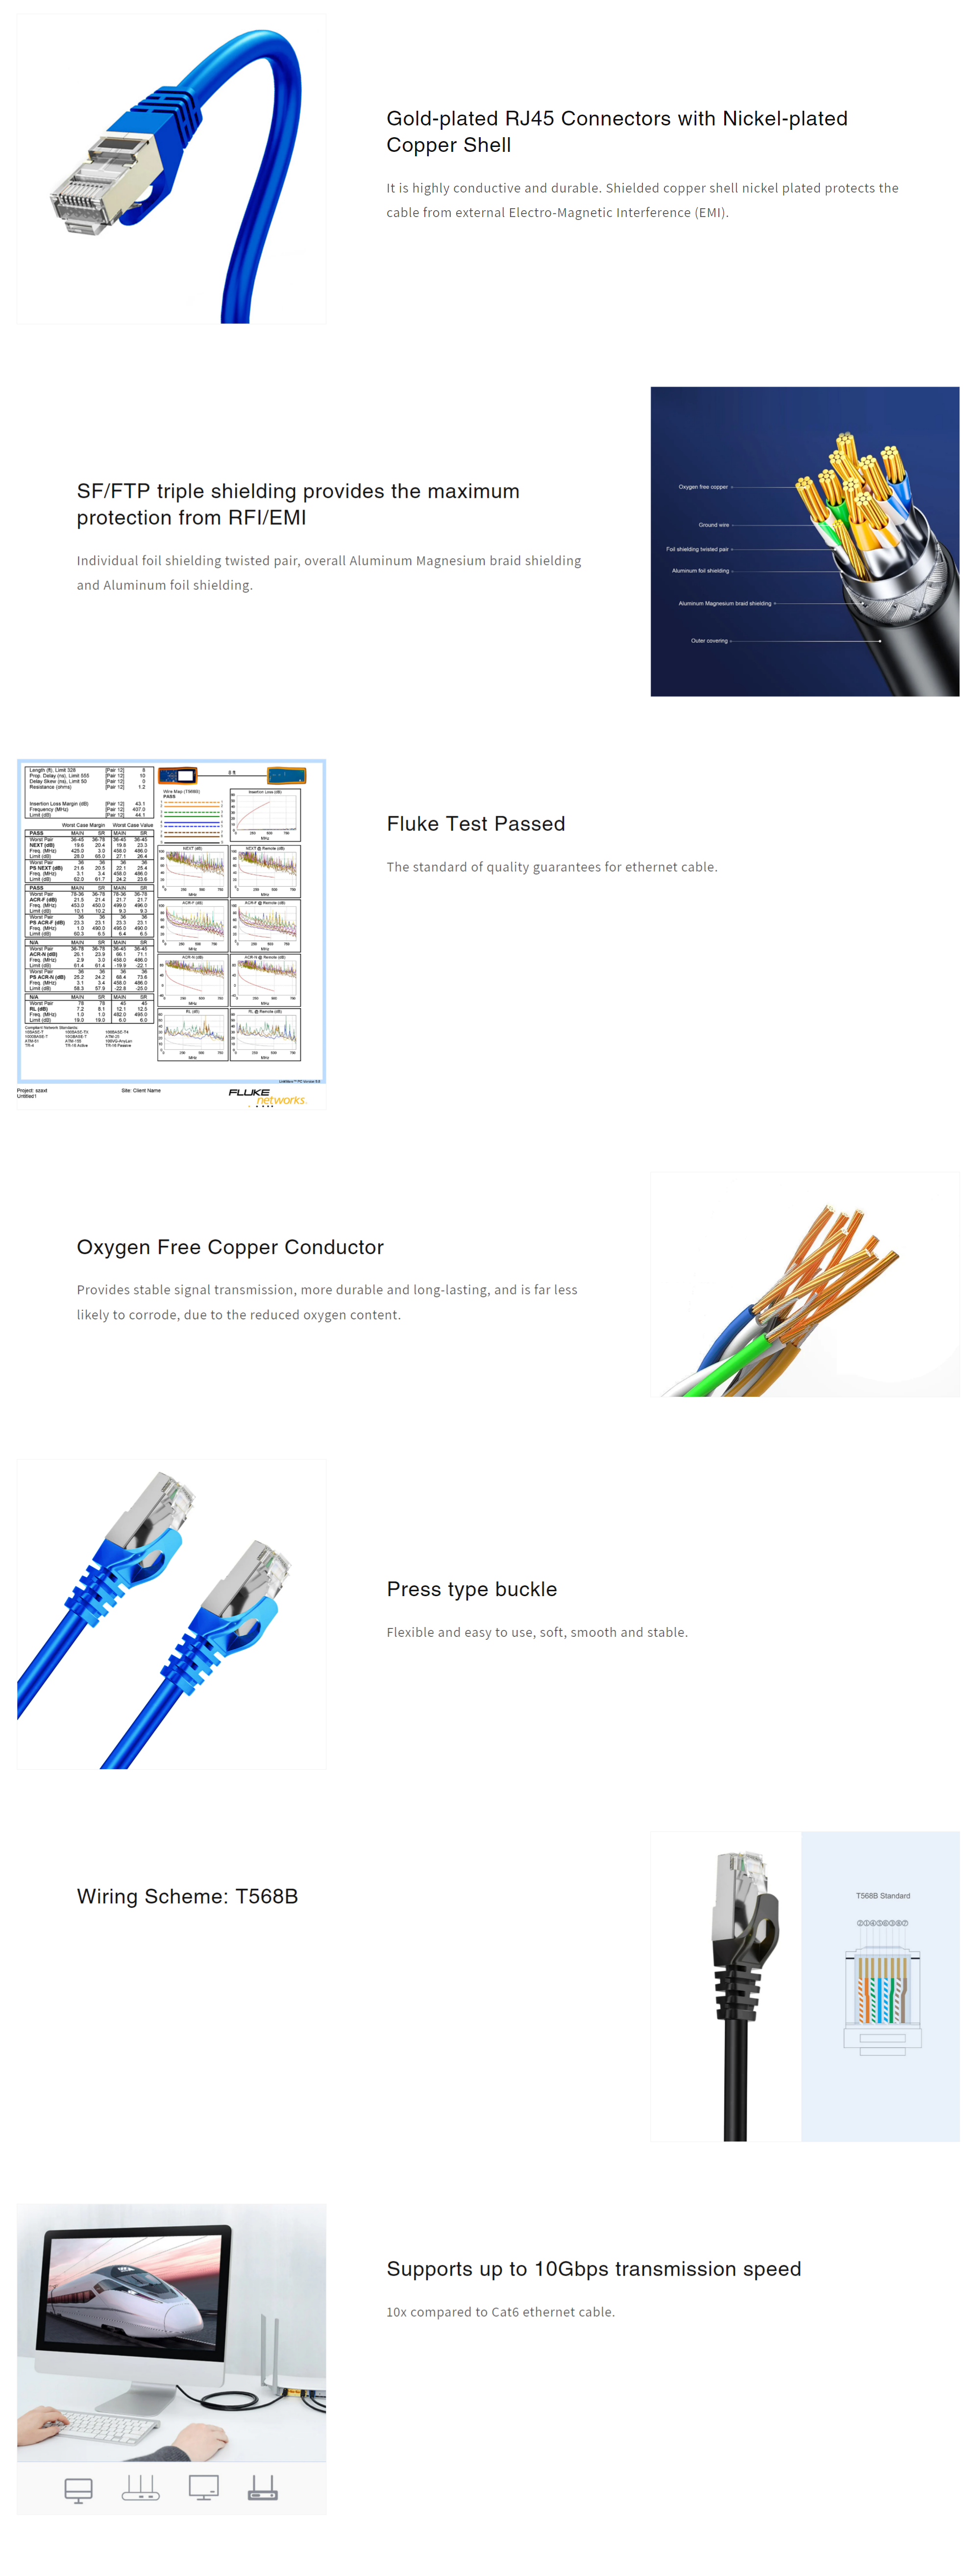 A large marketing image providing additional information about the product Cruxtec Cat7 1m 10GbE SF/FTP Triple Shielding Network Cable Blue - Additional alt info not provided